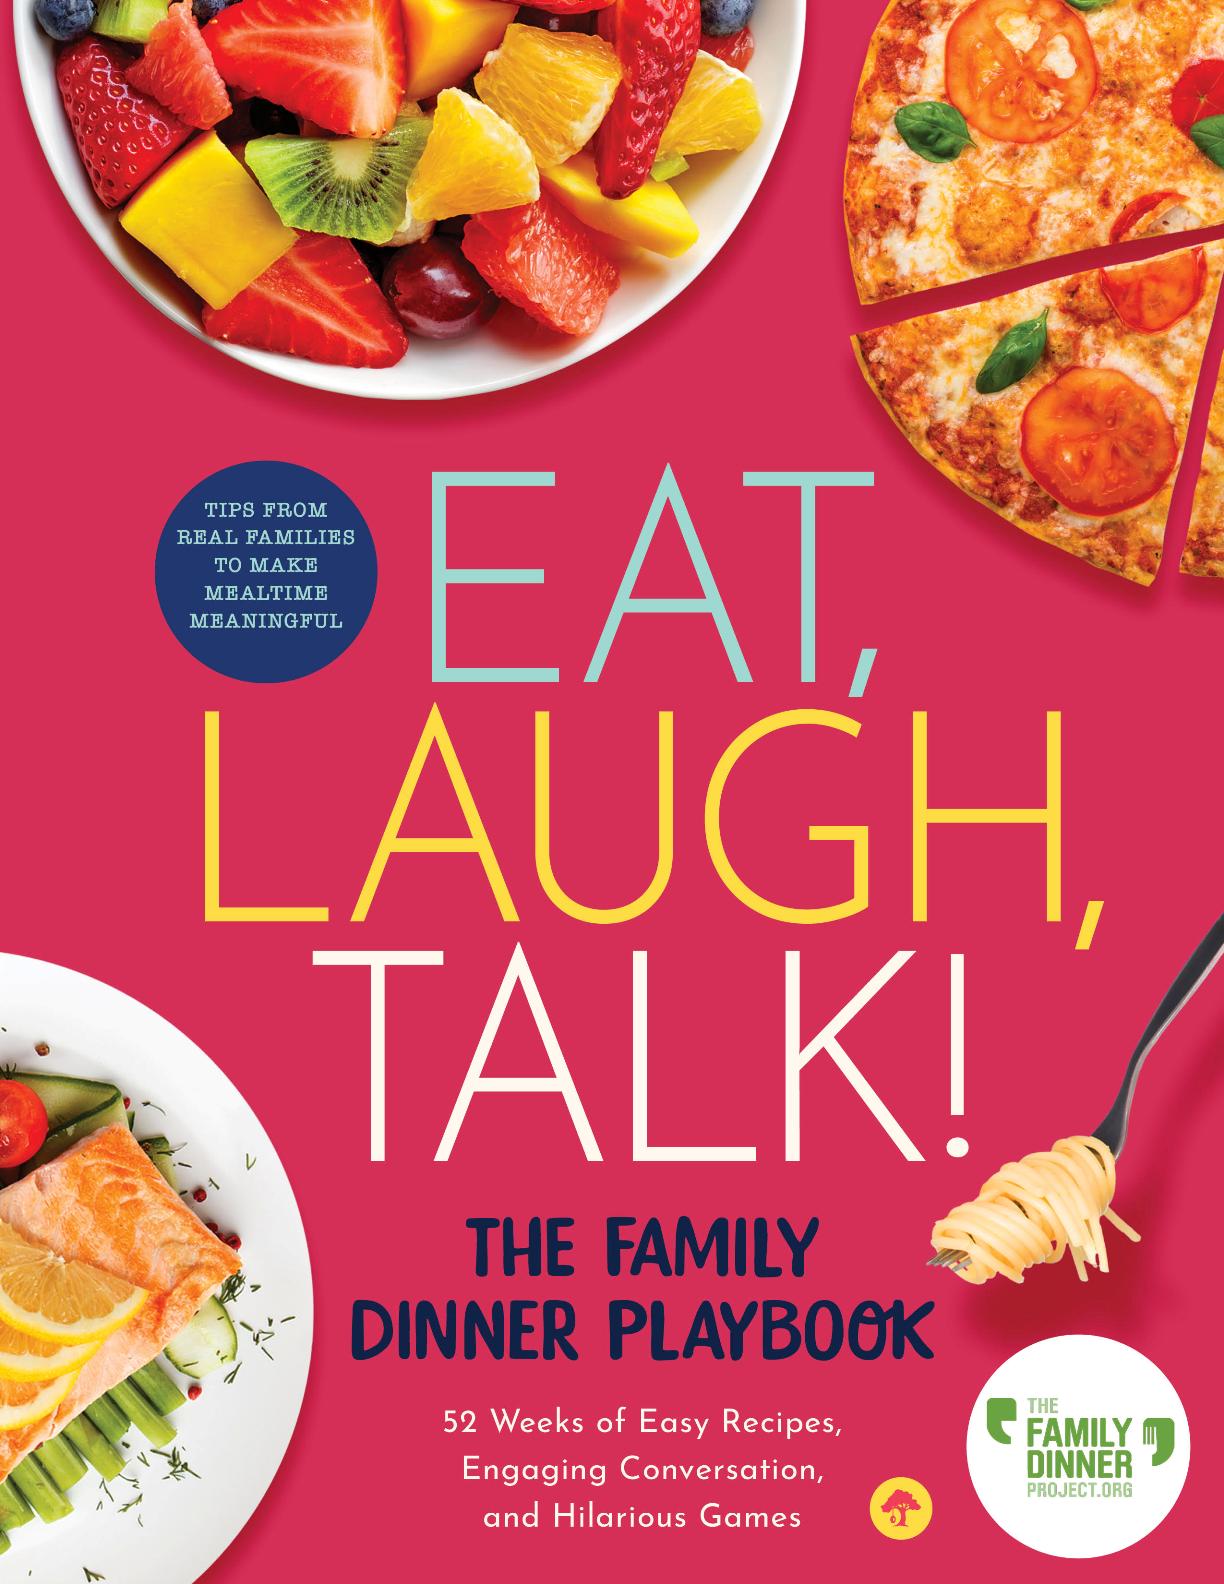 Eat, Laugh, Talk, The Family Dinner Playbook.